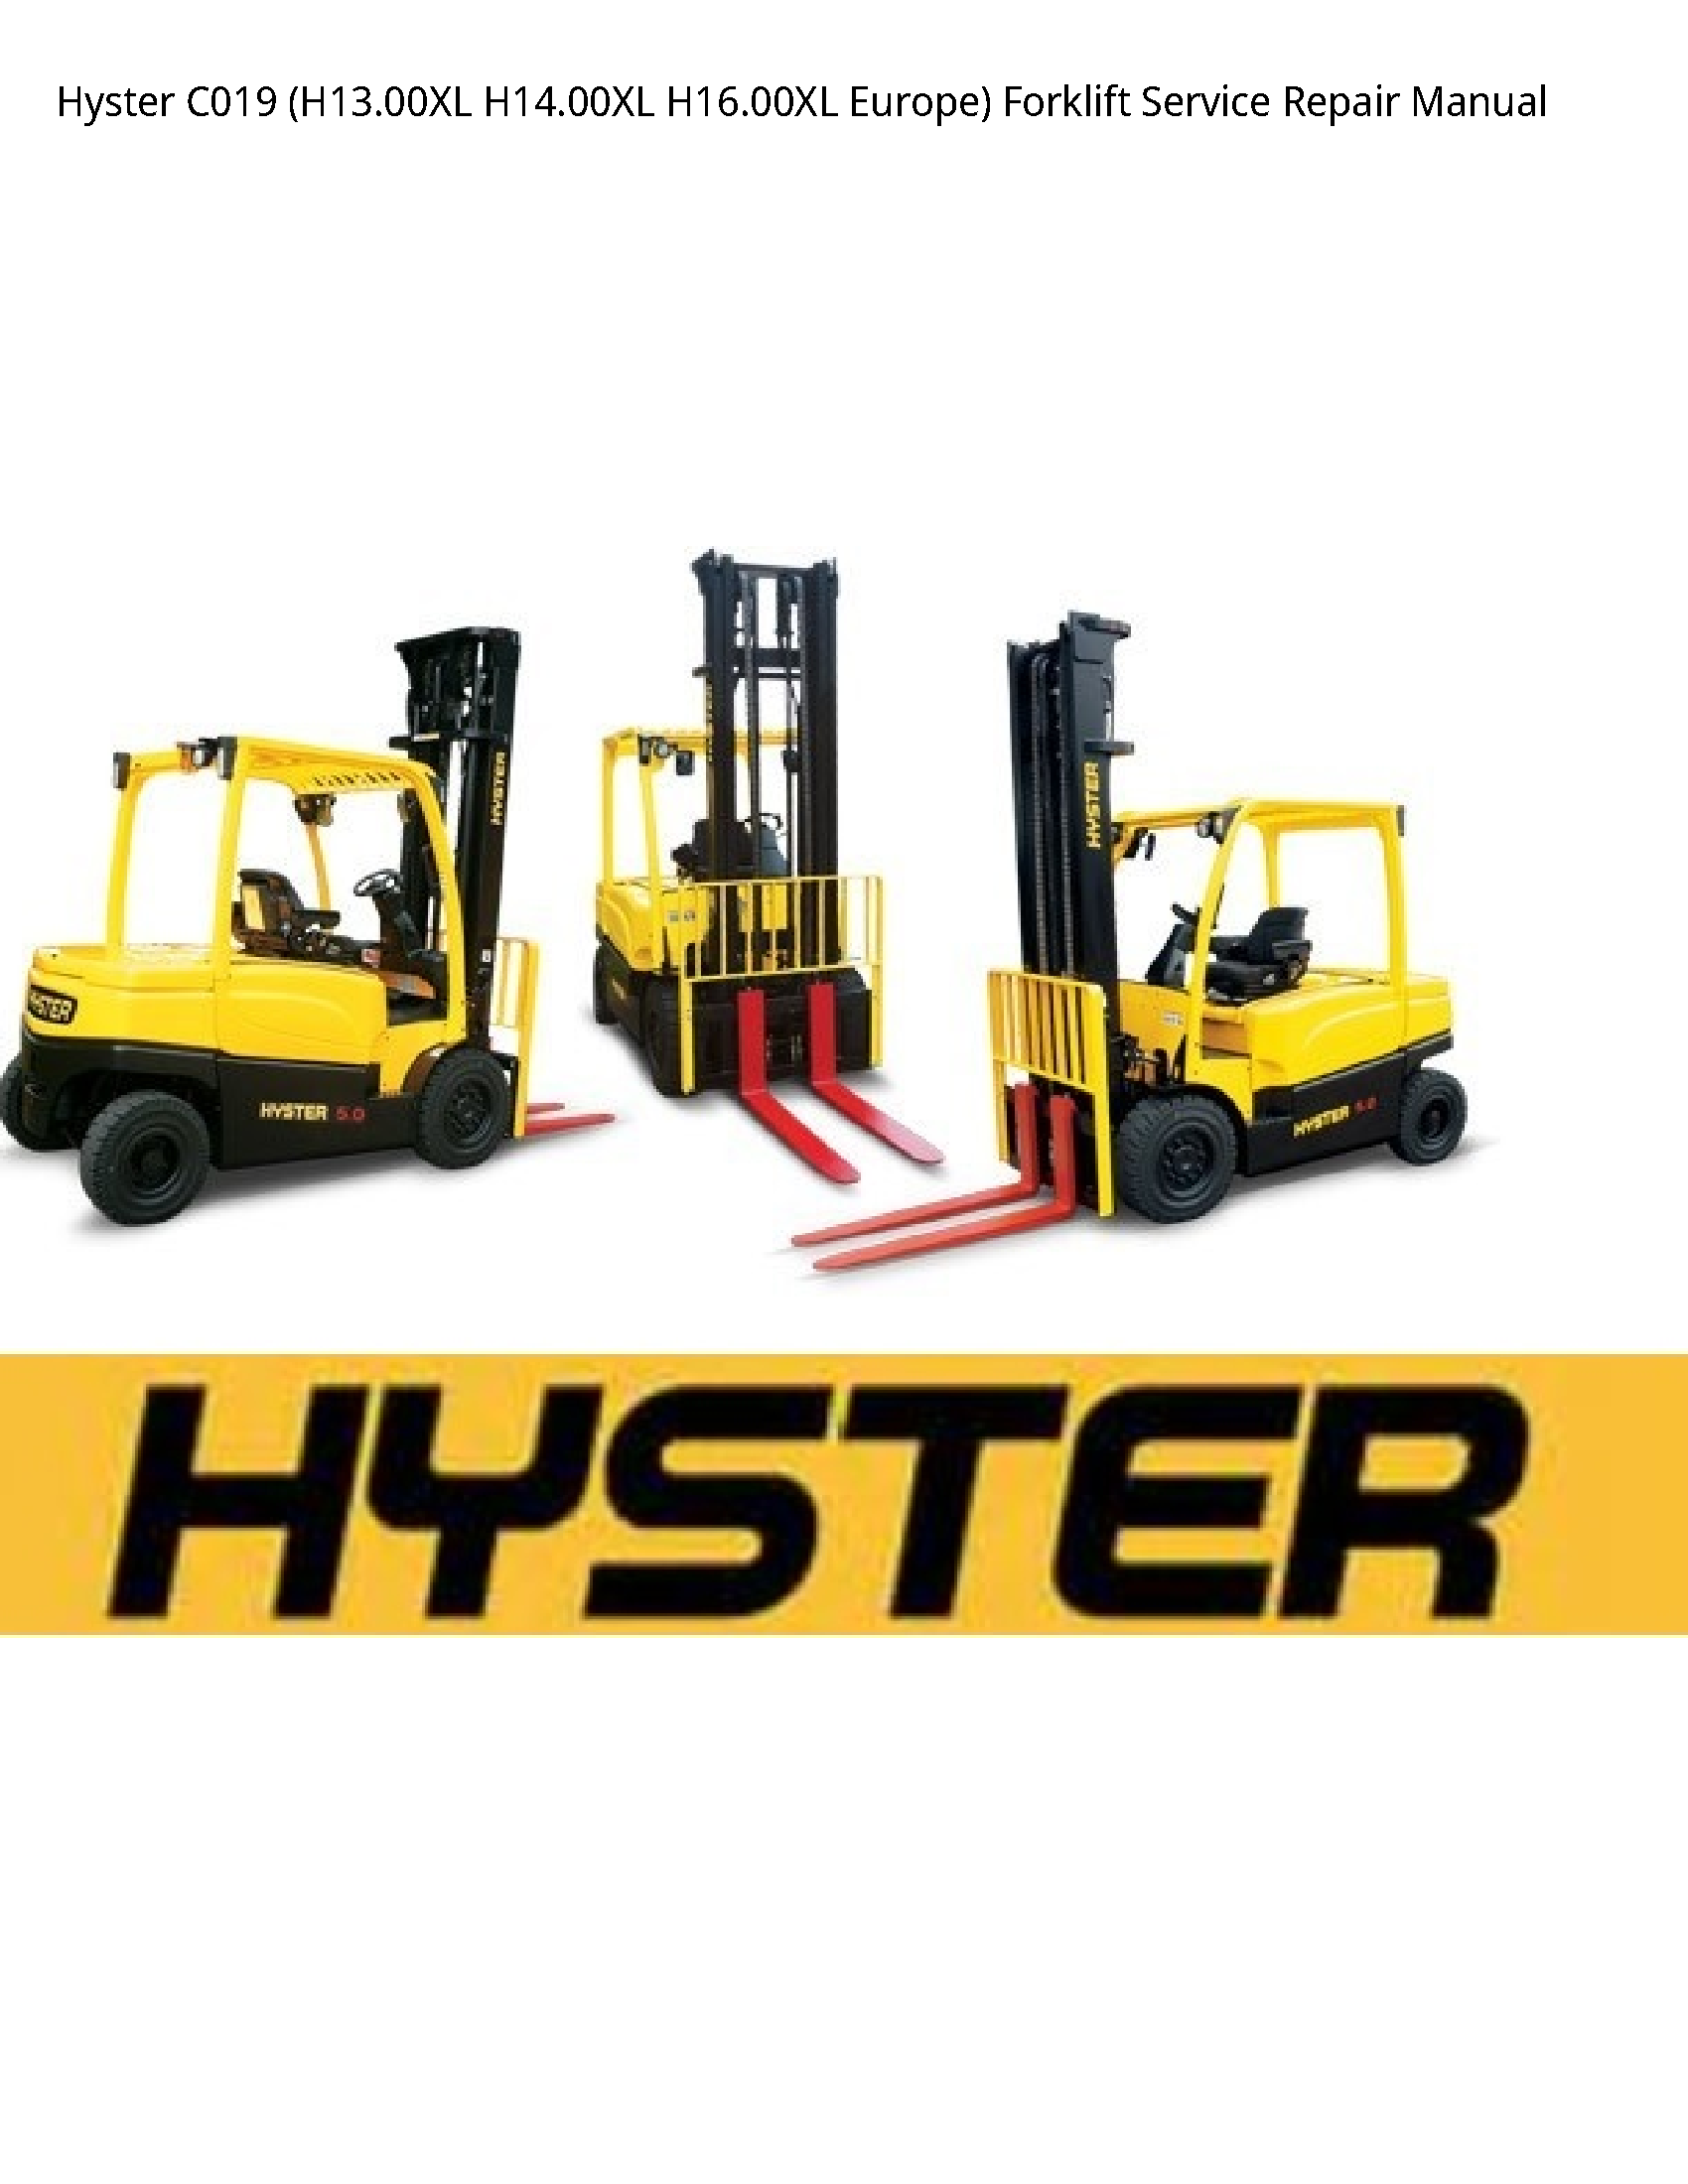 Hyster C019 Europe) Forklift manual